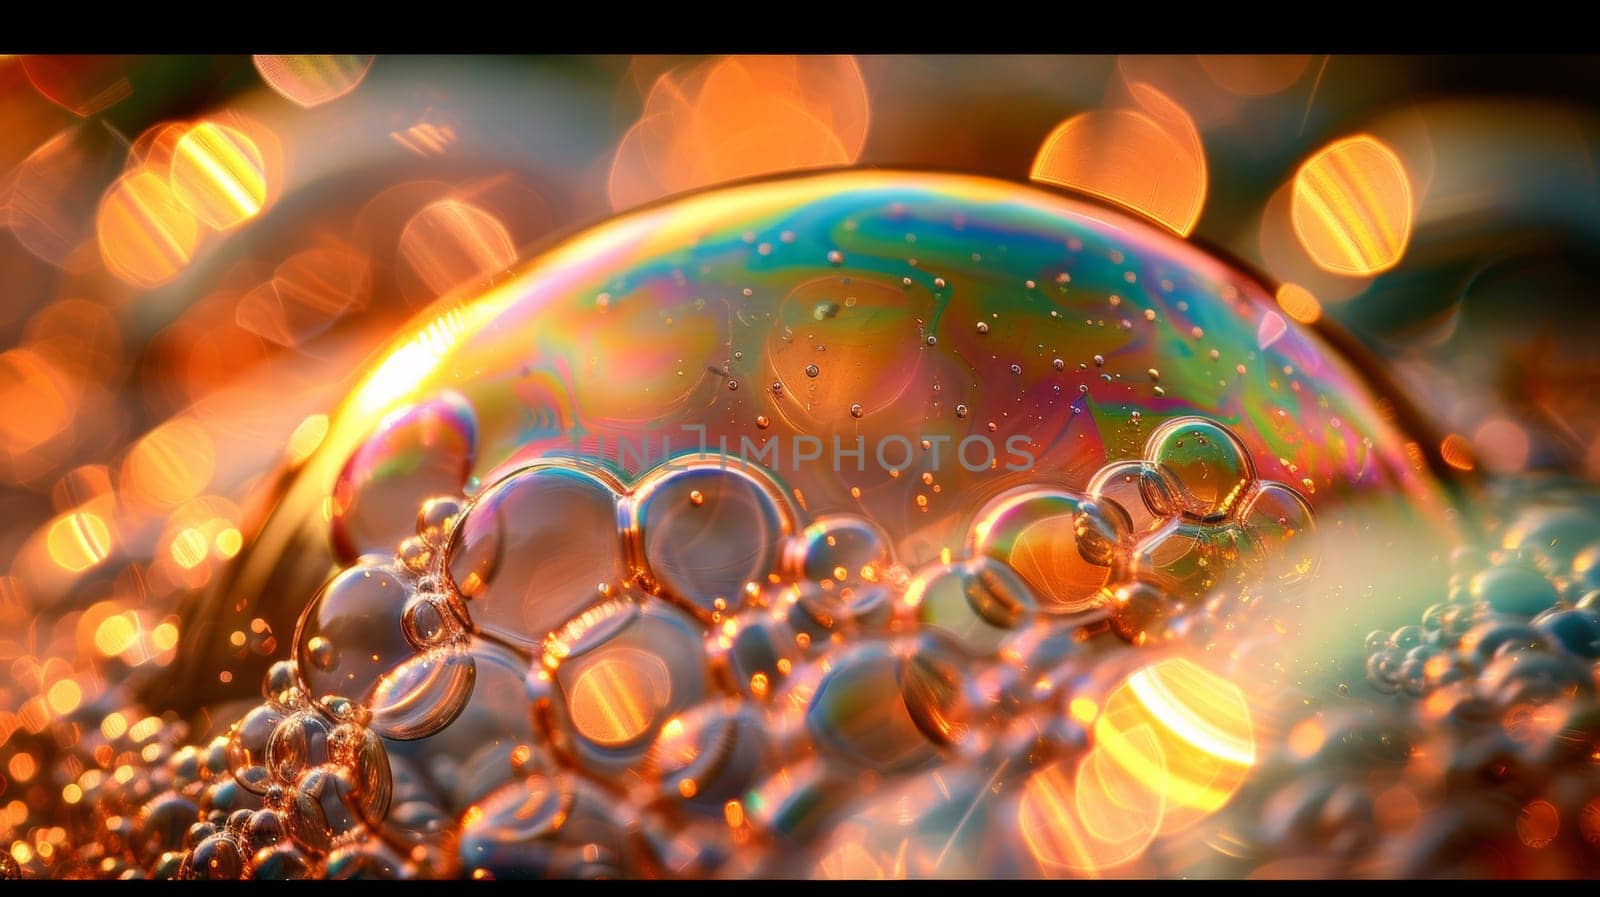 A close up of a bubble filled with bubbles and water